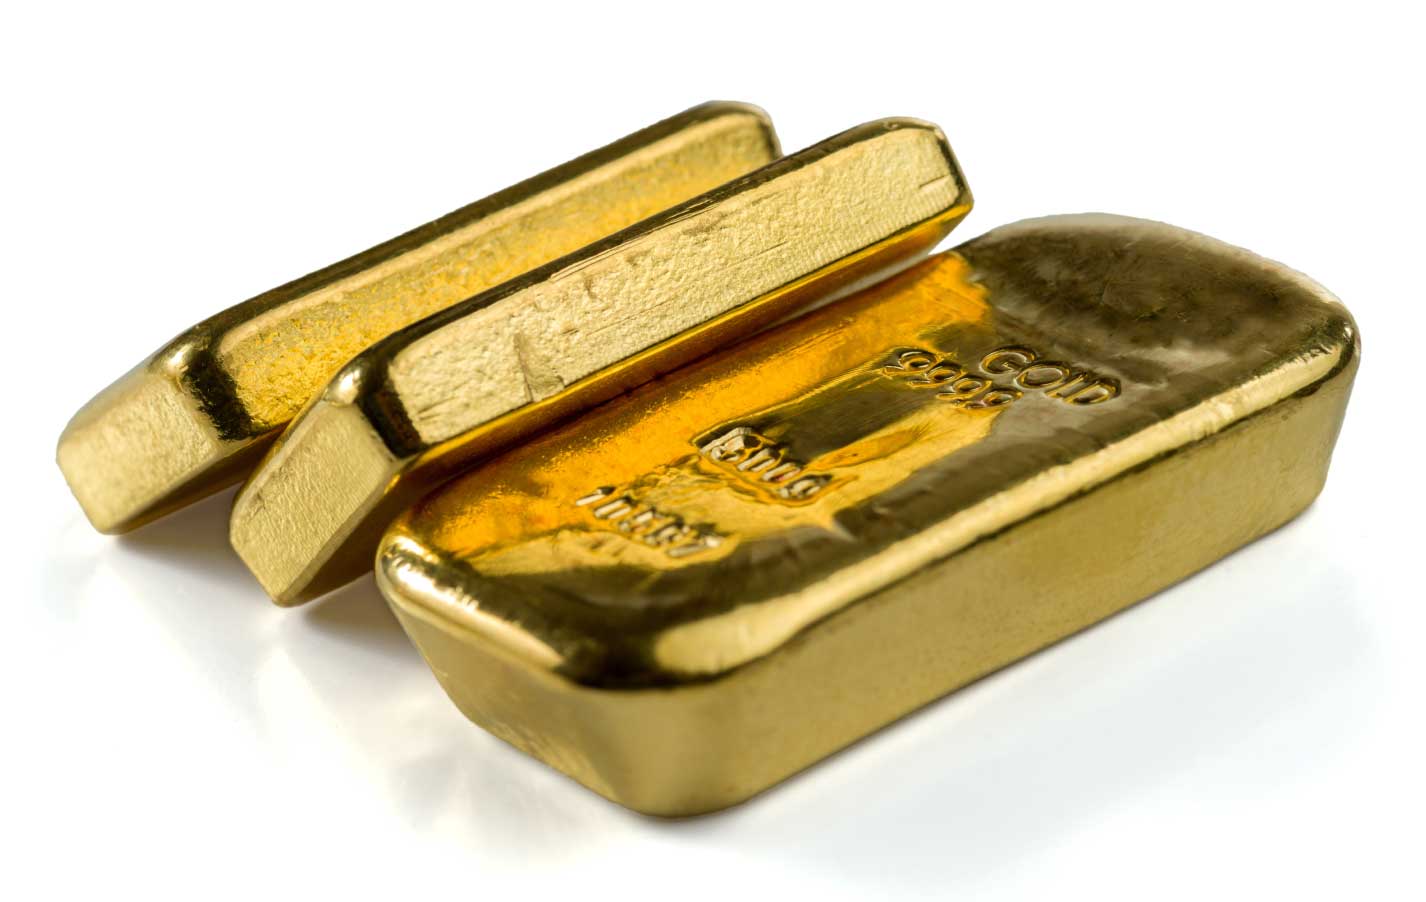 How To Win Clients And Influence Markets with investing in gold and silver